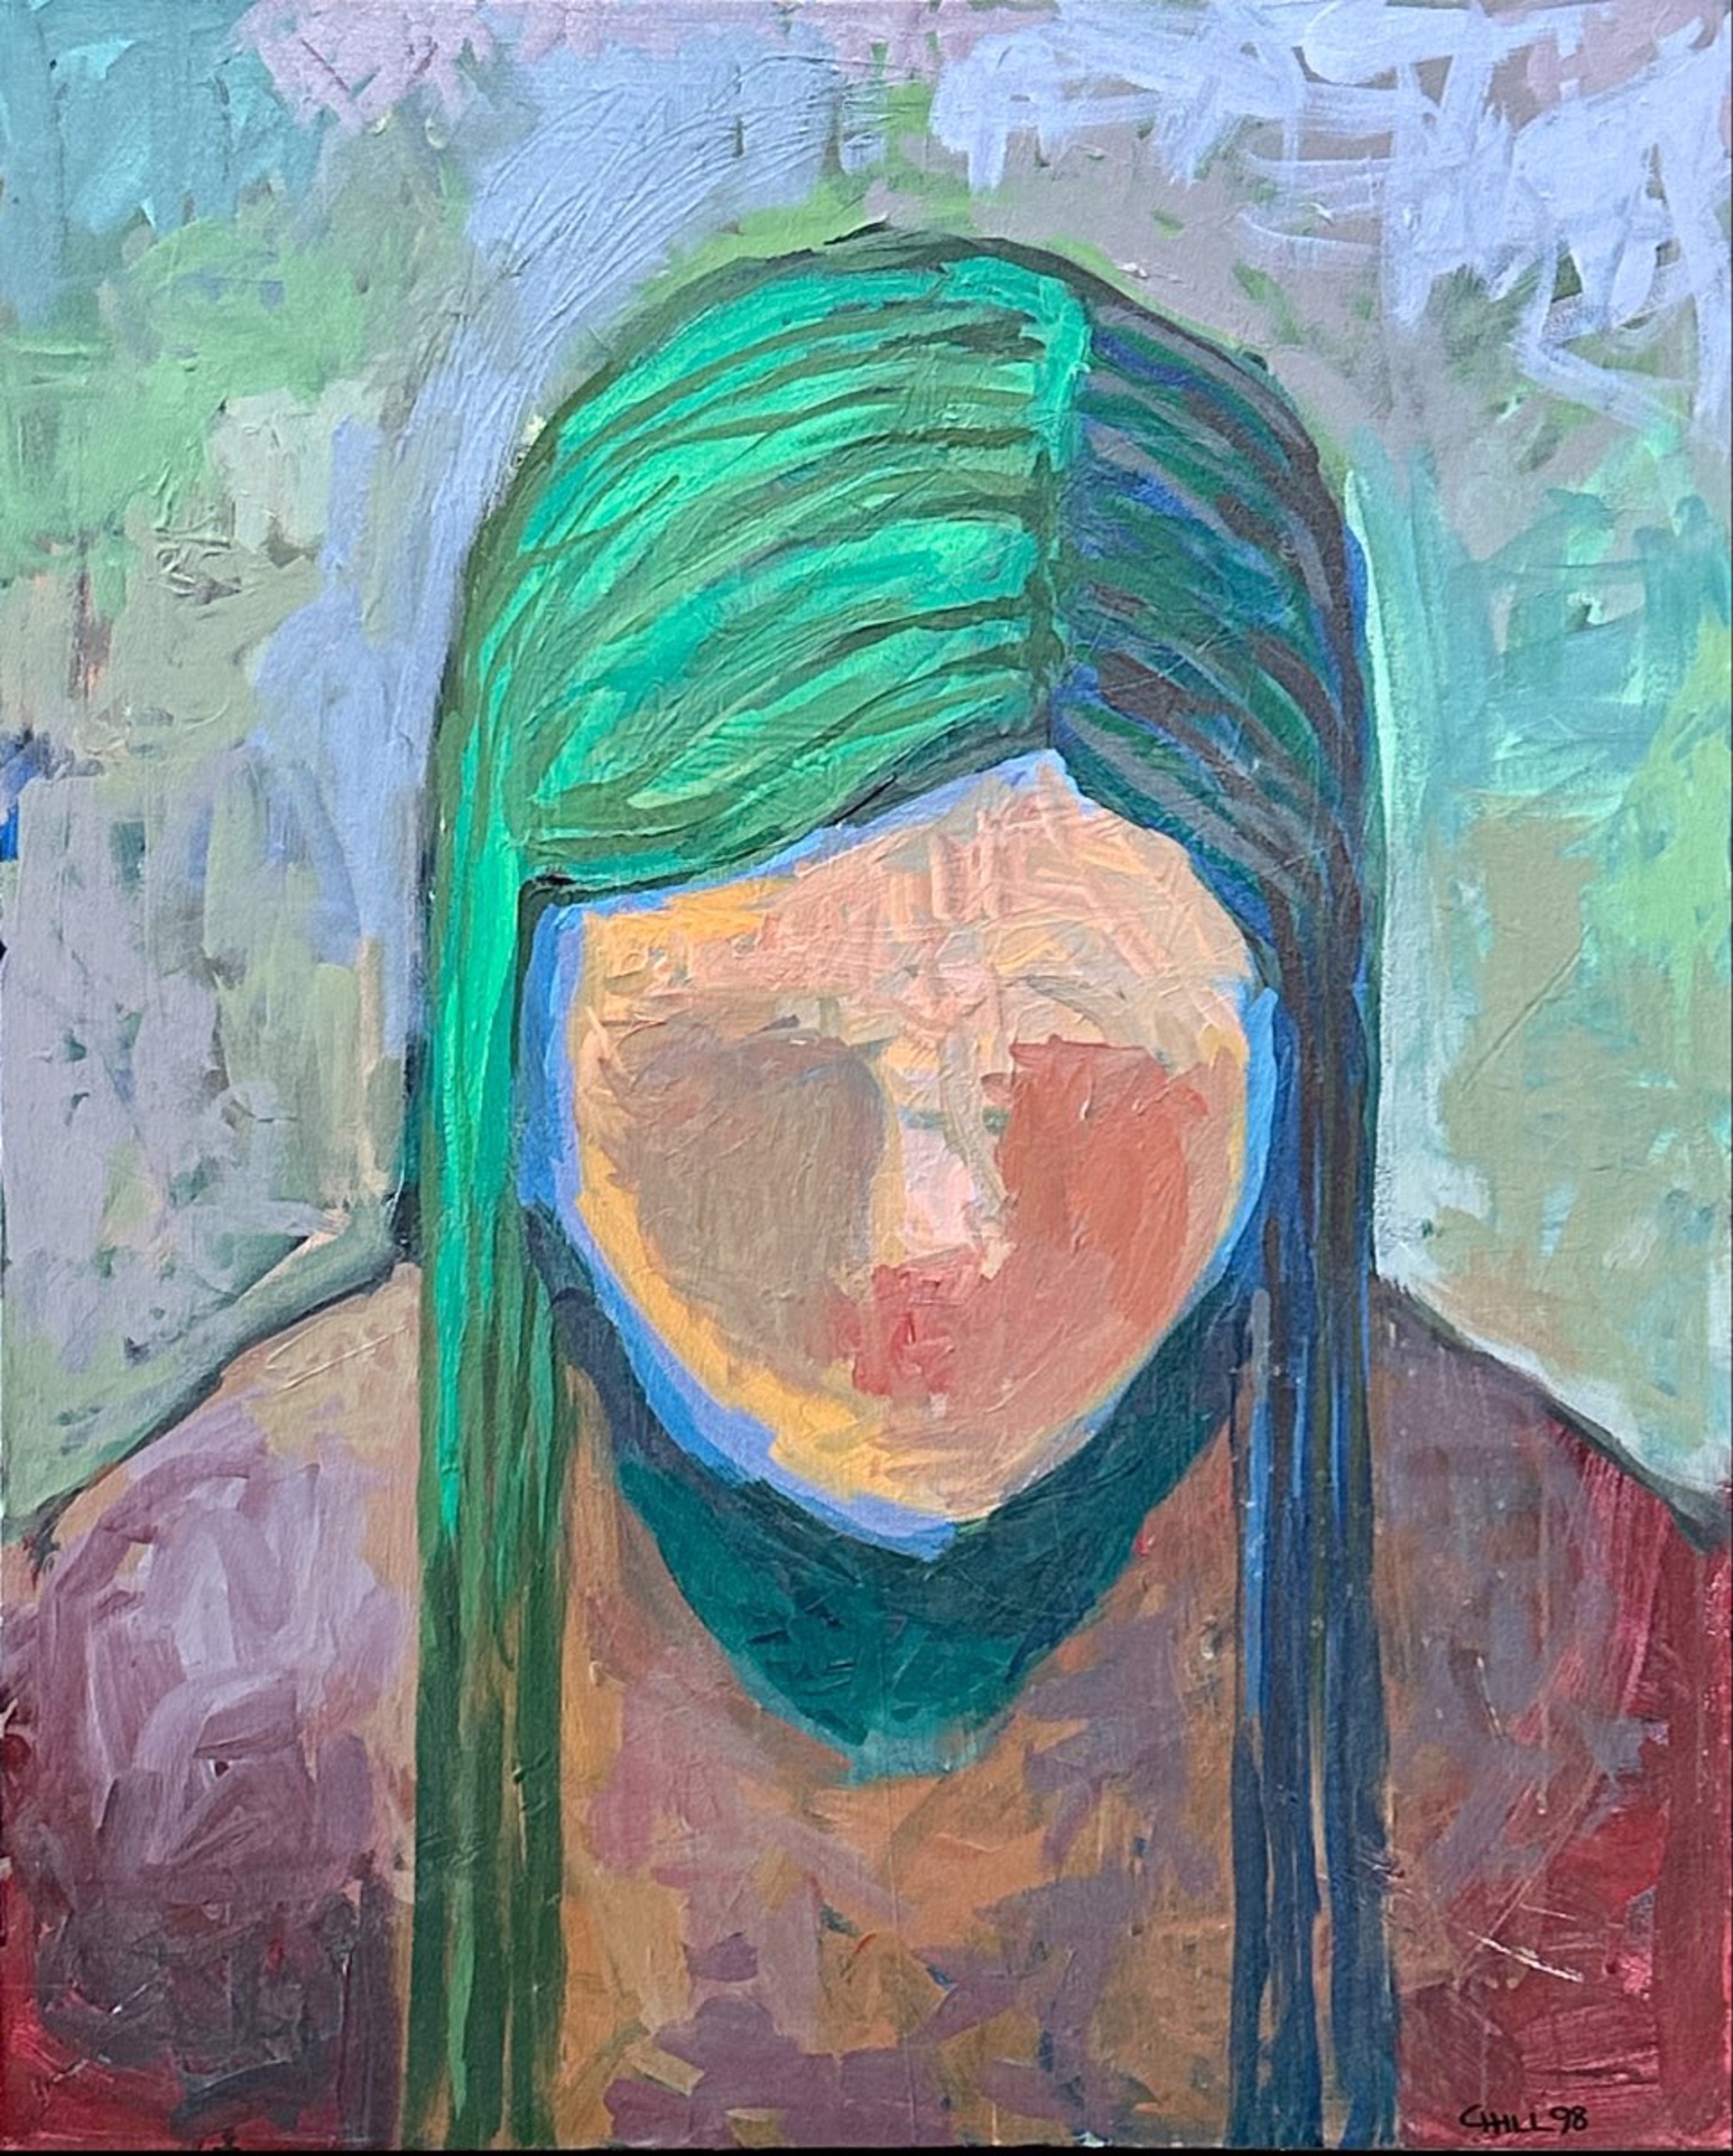 "Woman Portrait" by Chill circa 1998 by Art One Resale Inventory